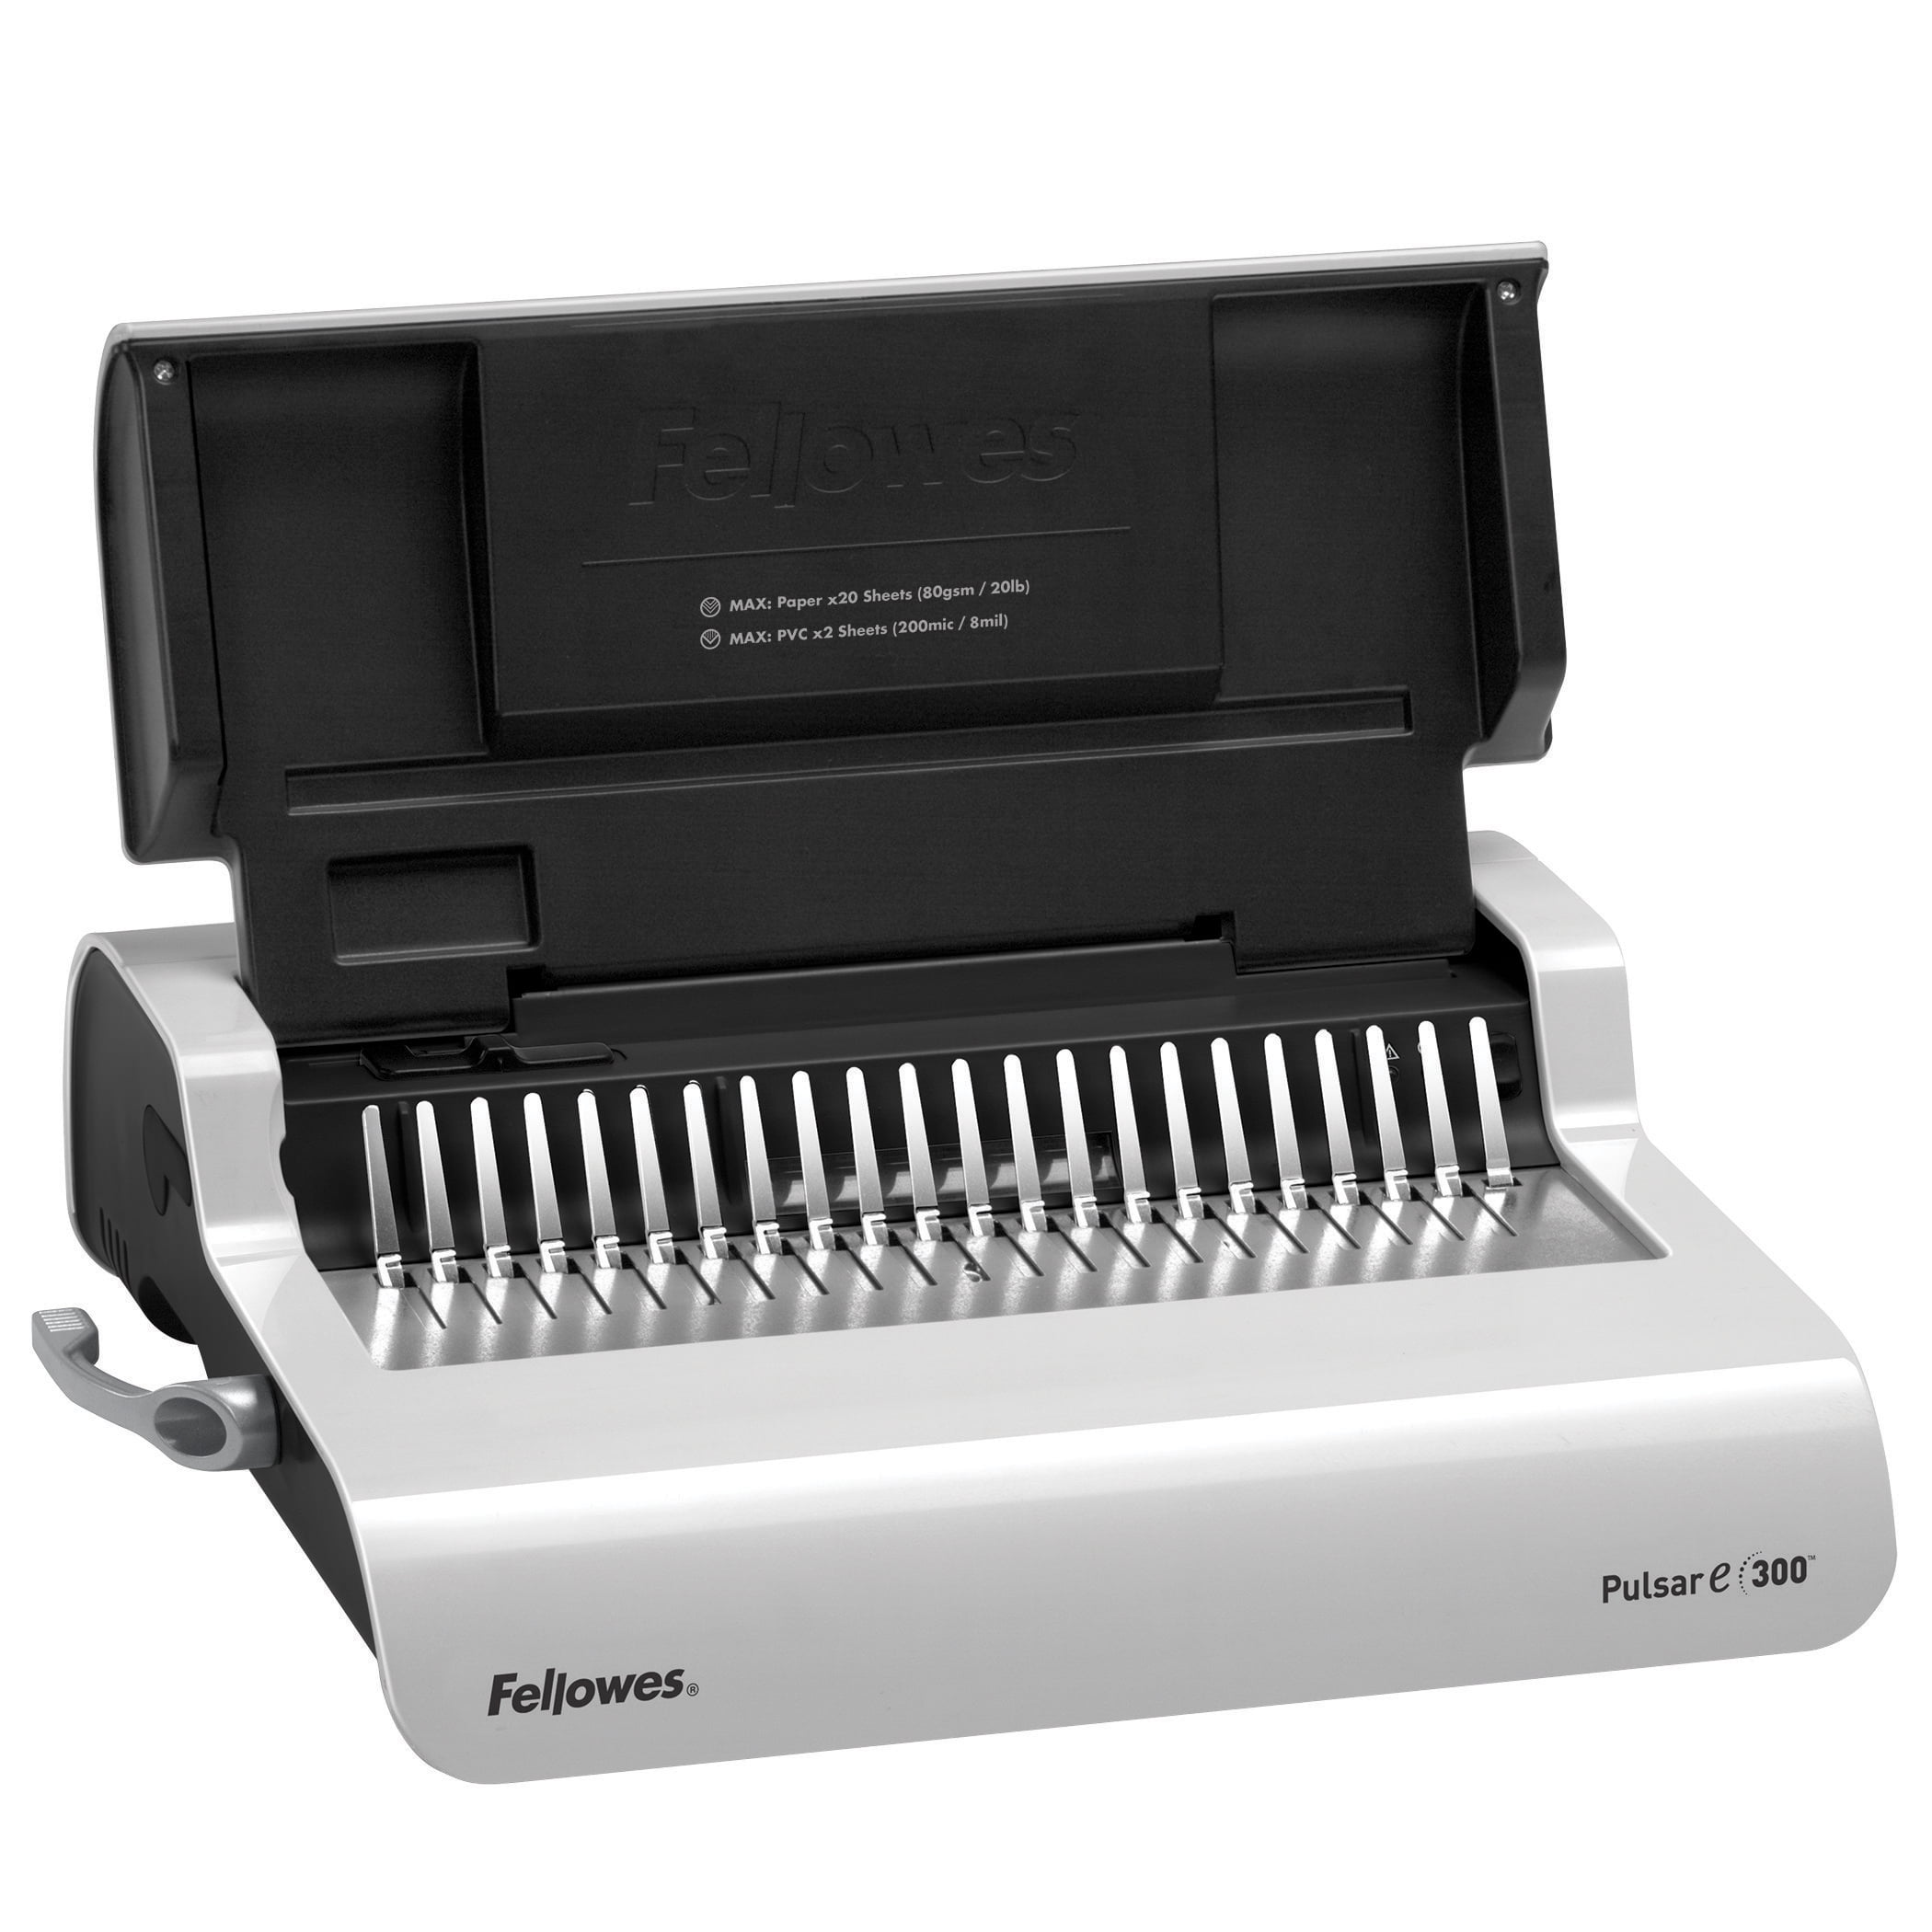 Fellowes Mfg. Co. Pulsar E Electric Comb Binding System, 300 Sheets, 17 x  15 3/8 x 5 1/8, White